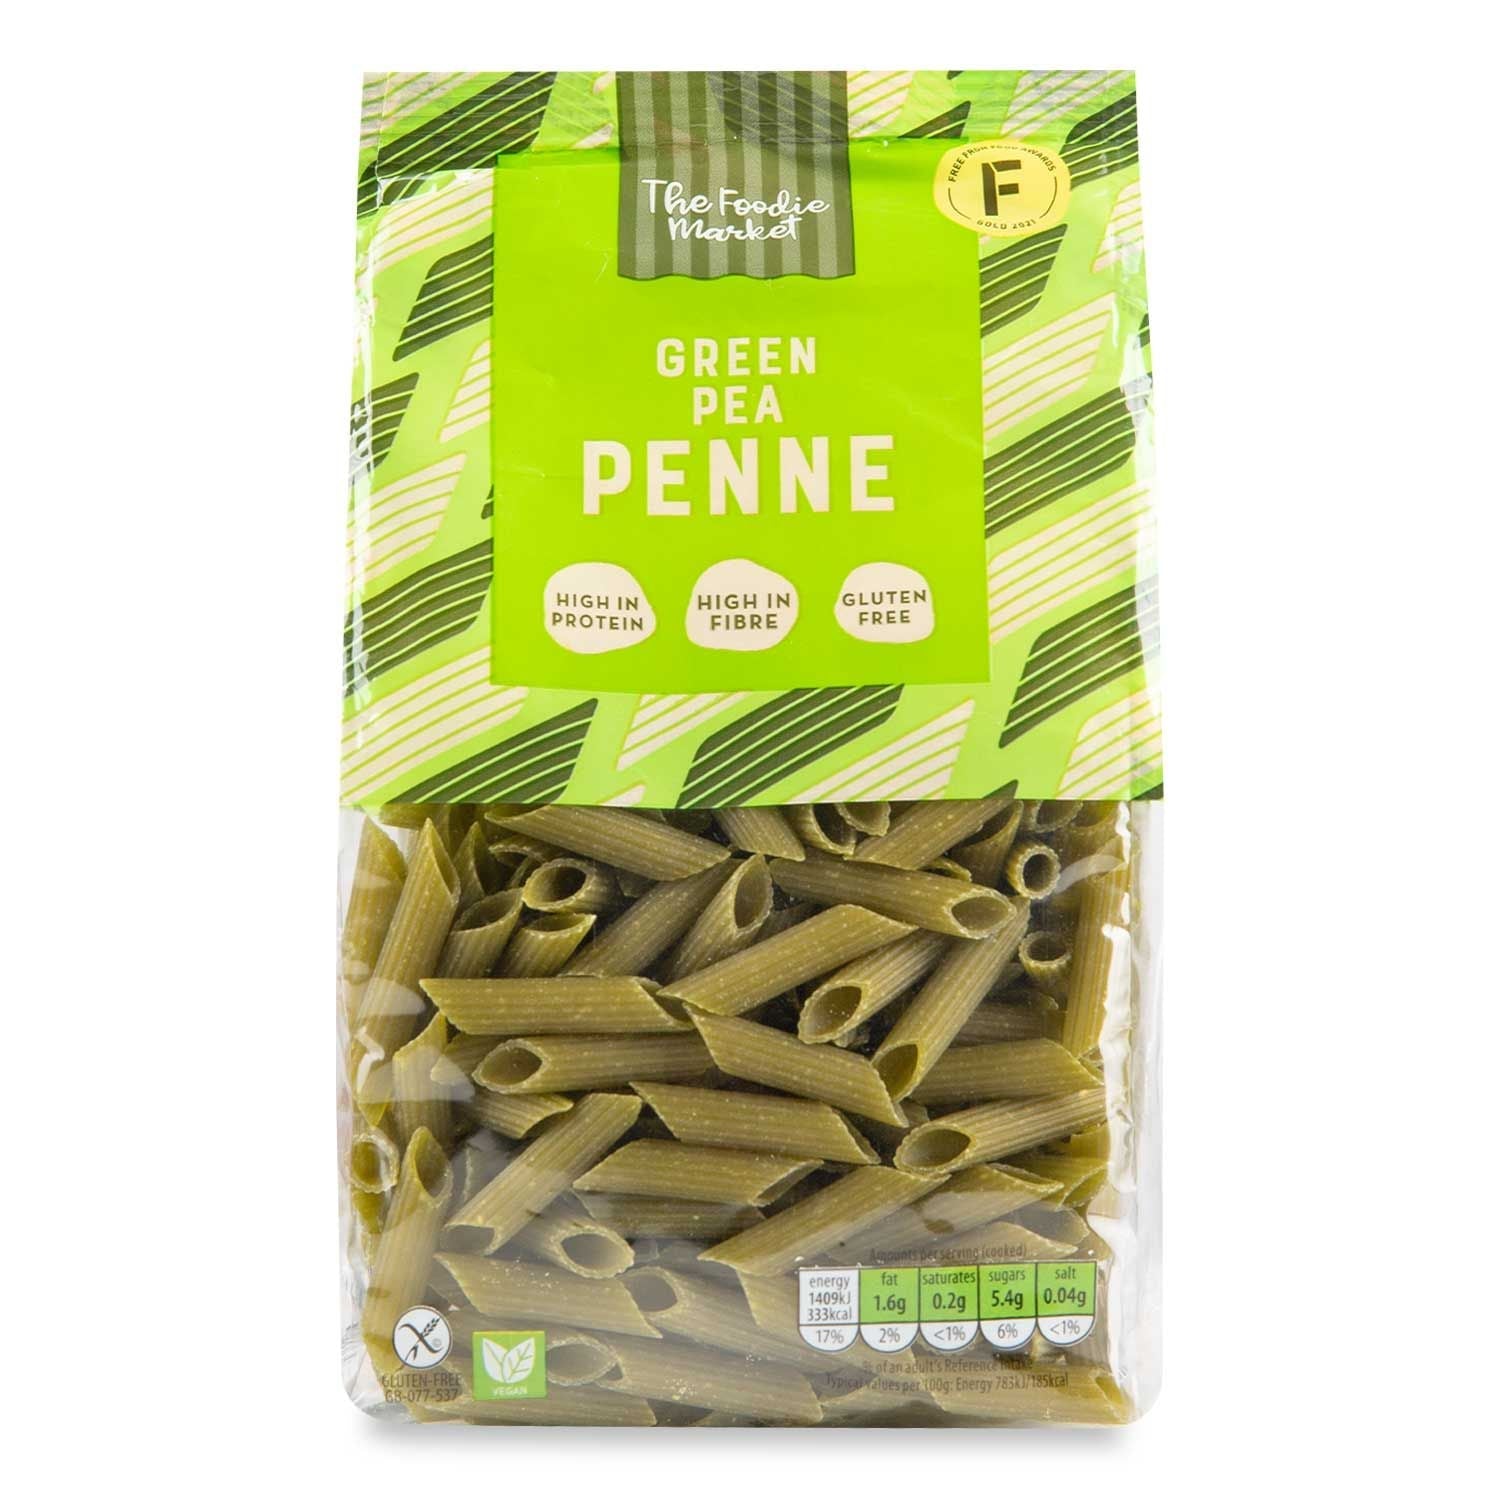 WSO - The Foodie Market Gluten Free Green Pea Penne 250g 1x24